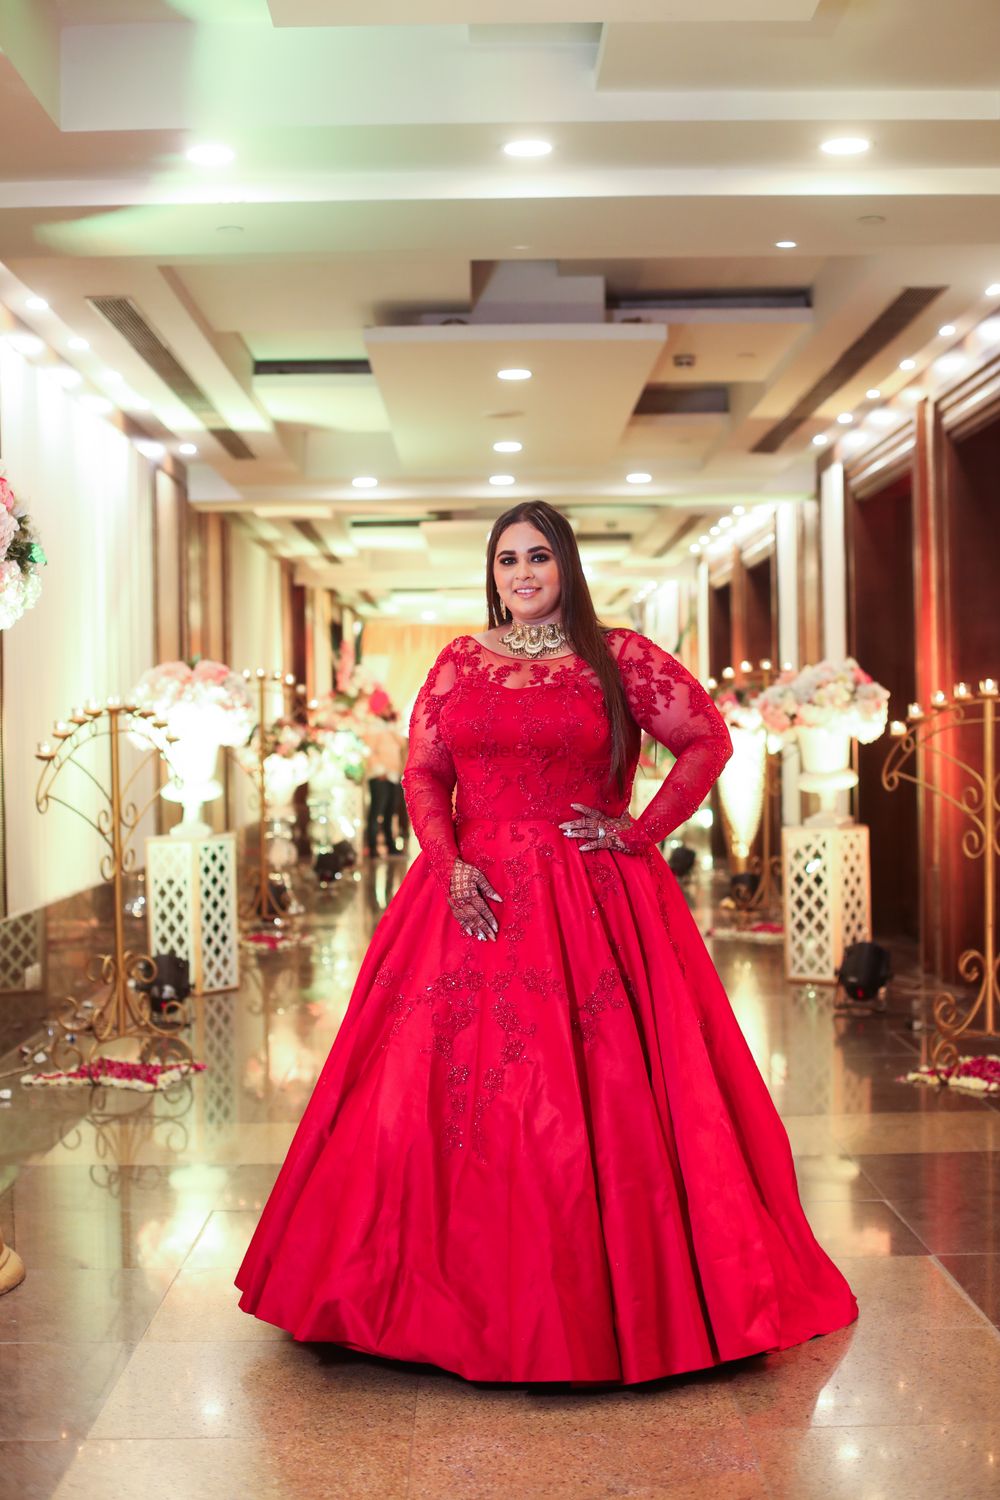 Photo of plus sized bride in a red gown